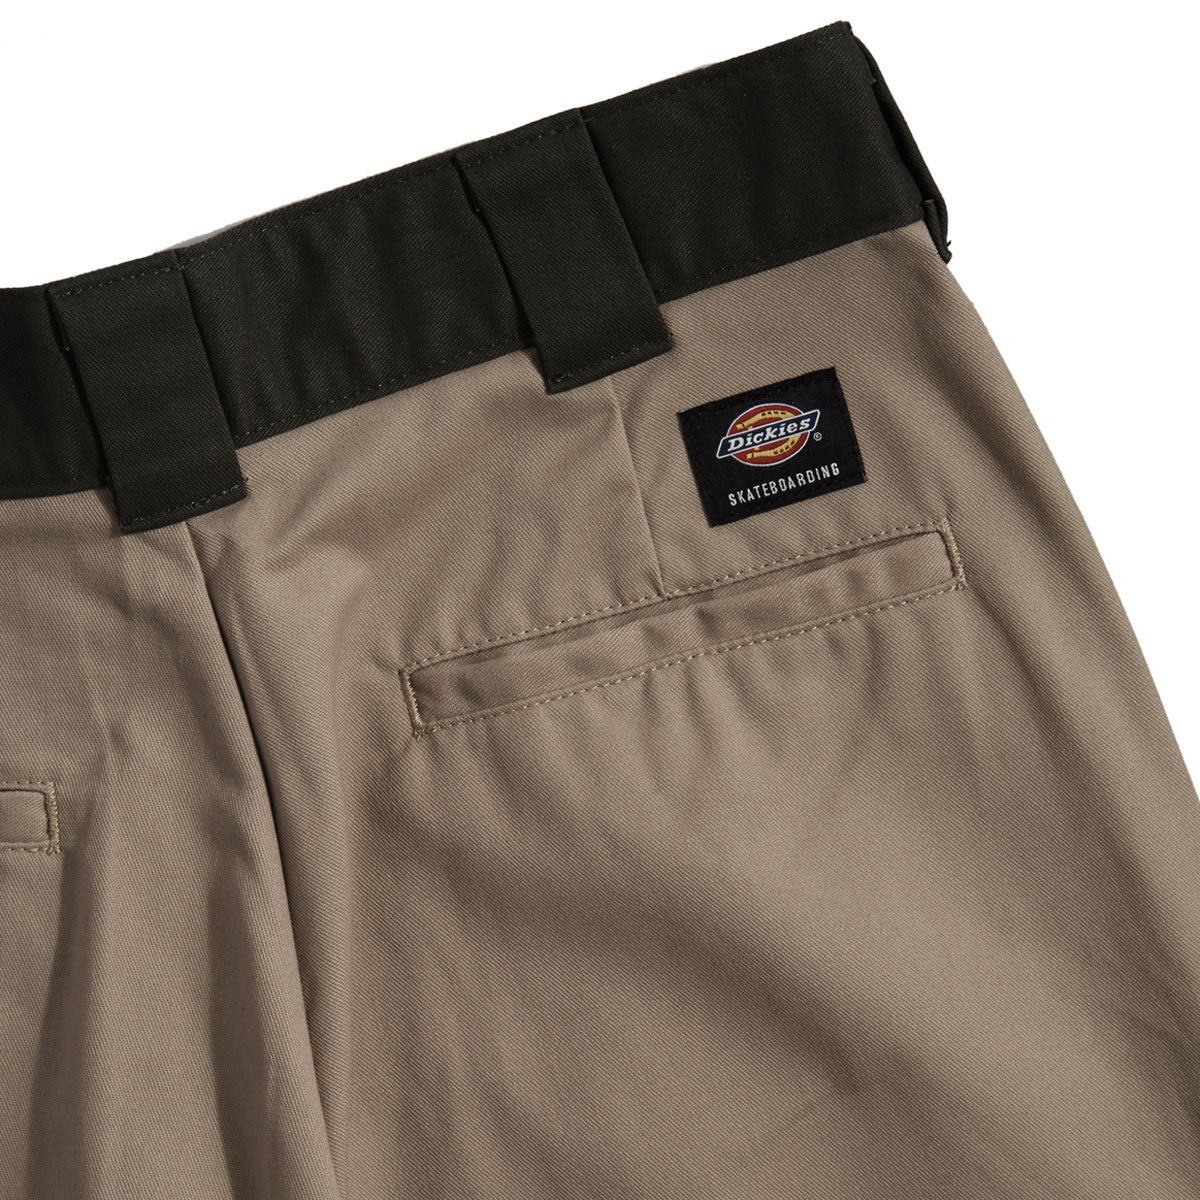 Dickies Ronnie Sandoval Loose Fit Double Knee Pants - Desert Sand/Olive Green image 4